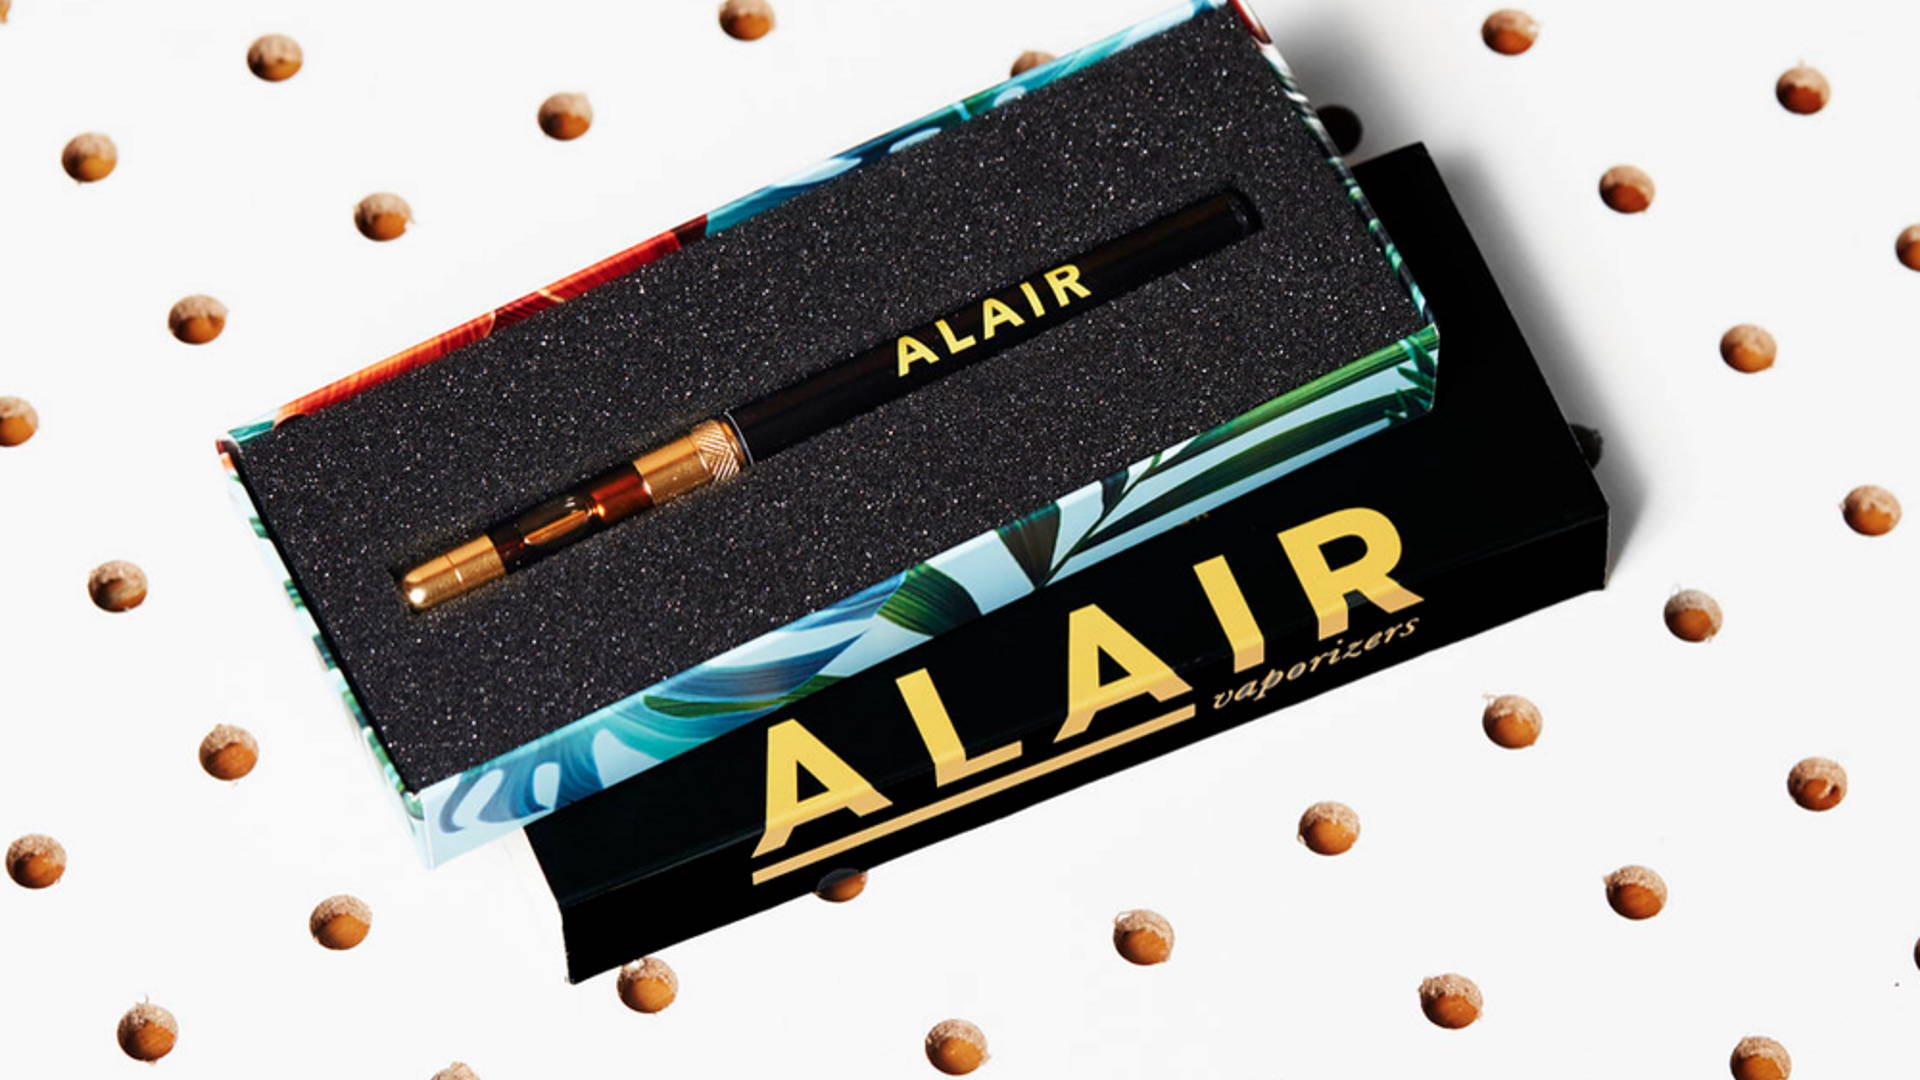 Featured image for This Elegant Vaporizer Packaging Comes With Some Tropical Elements